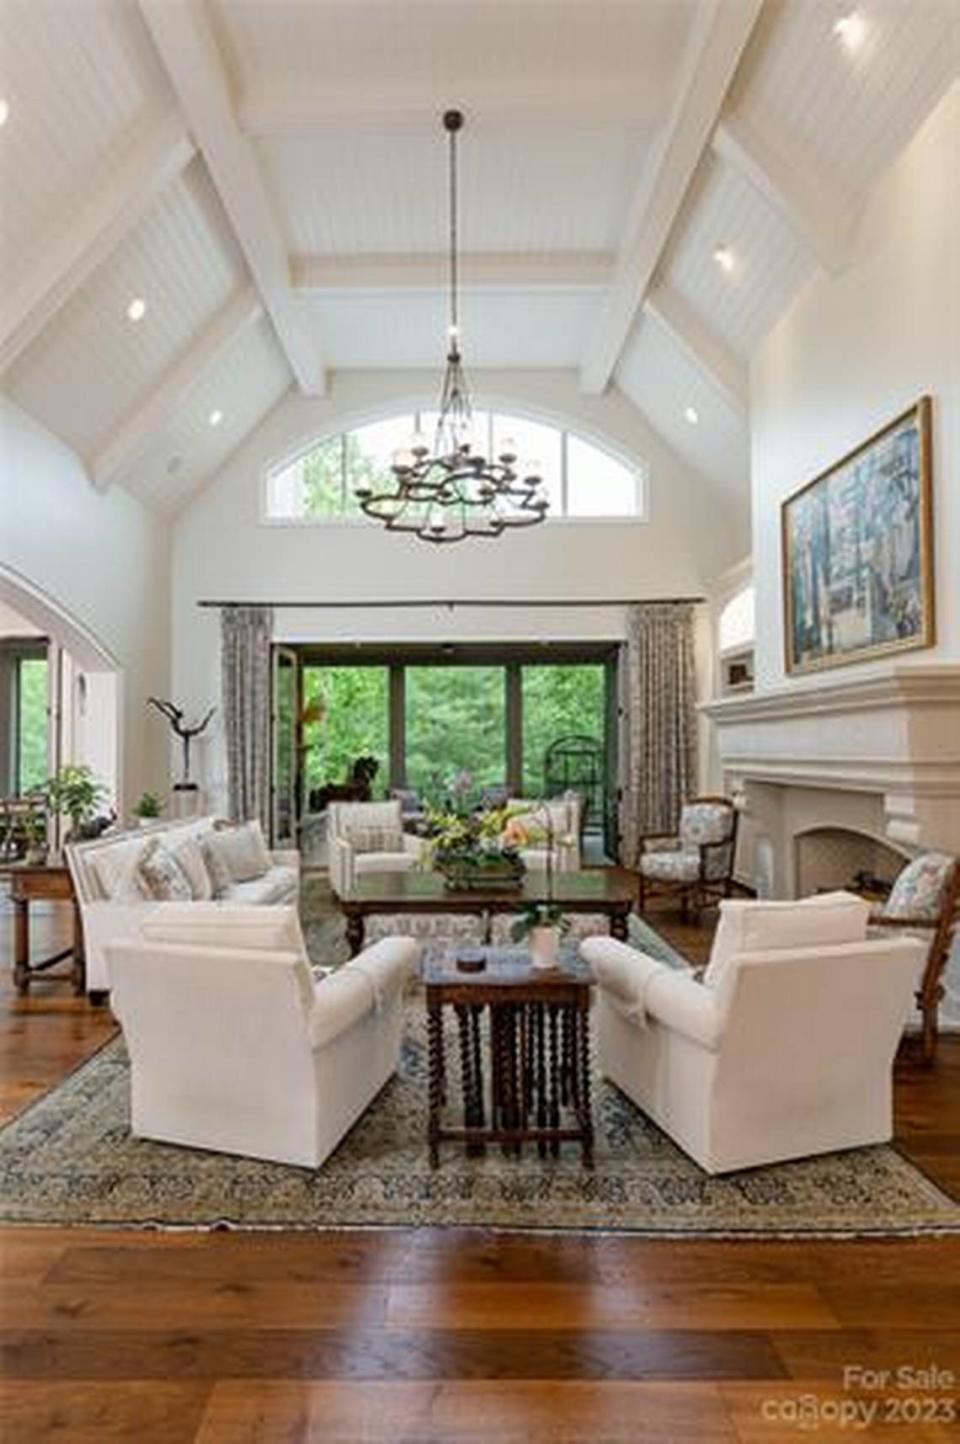 The grand entrance leads you into the foyer with soaring ceilings for a grand welcome.